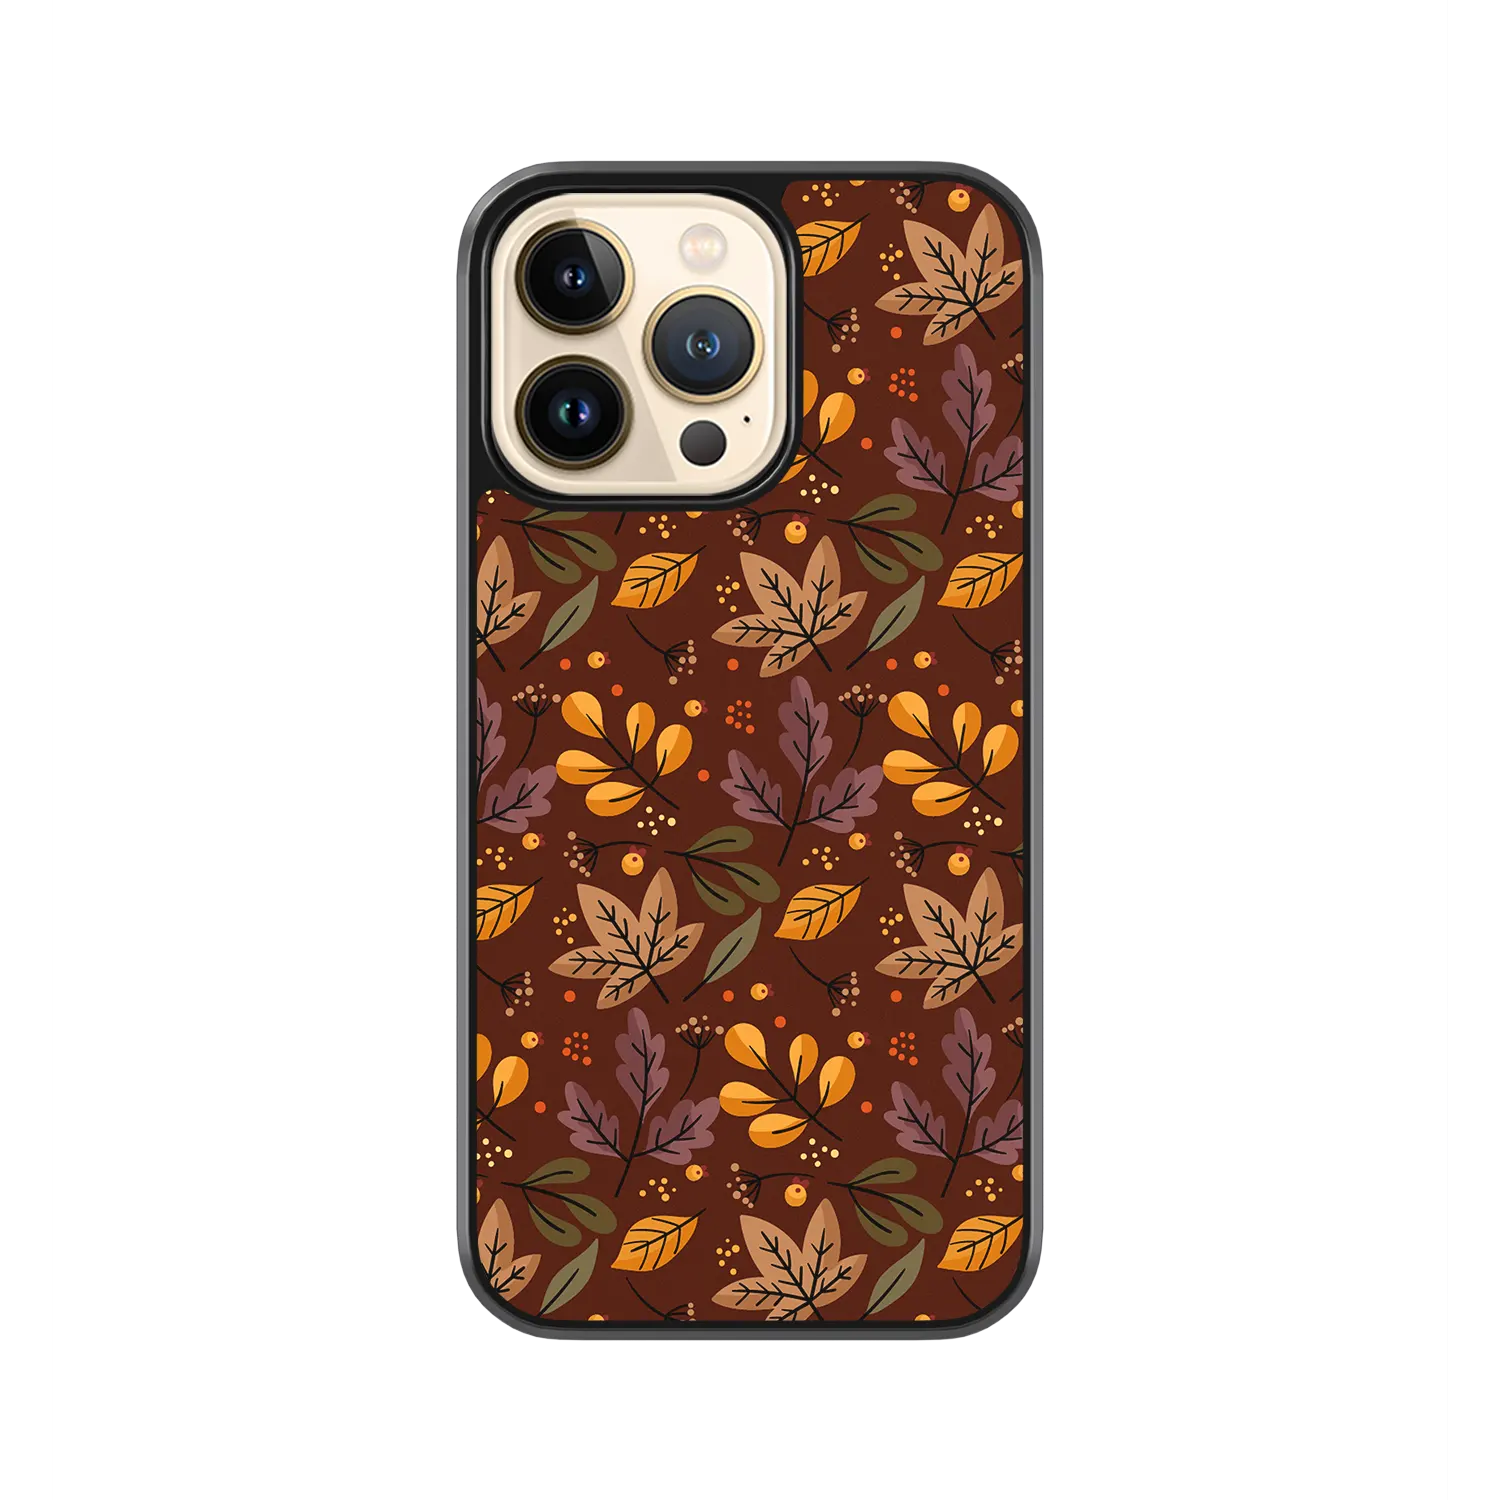 Fall-Leaves-iPhone-12-Pro-Case.webp